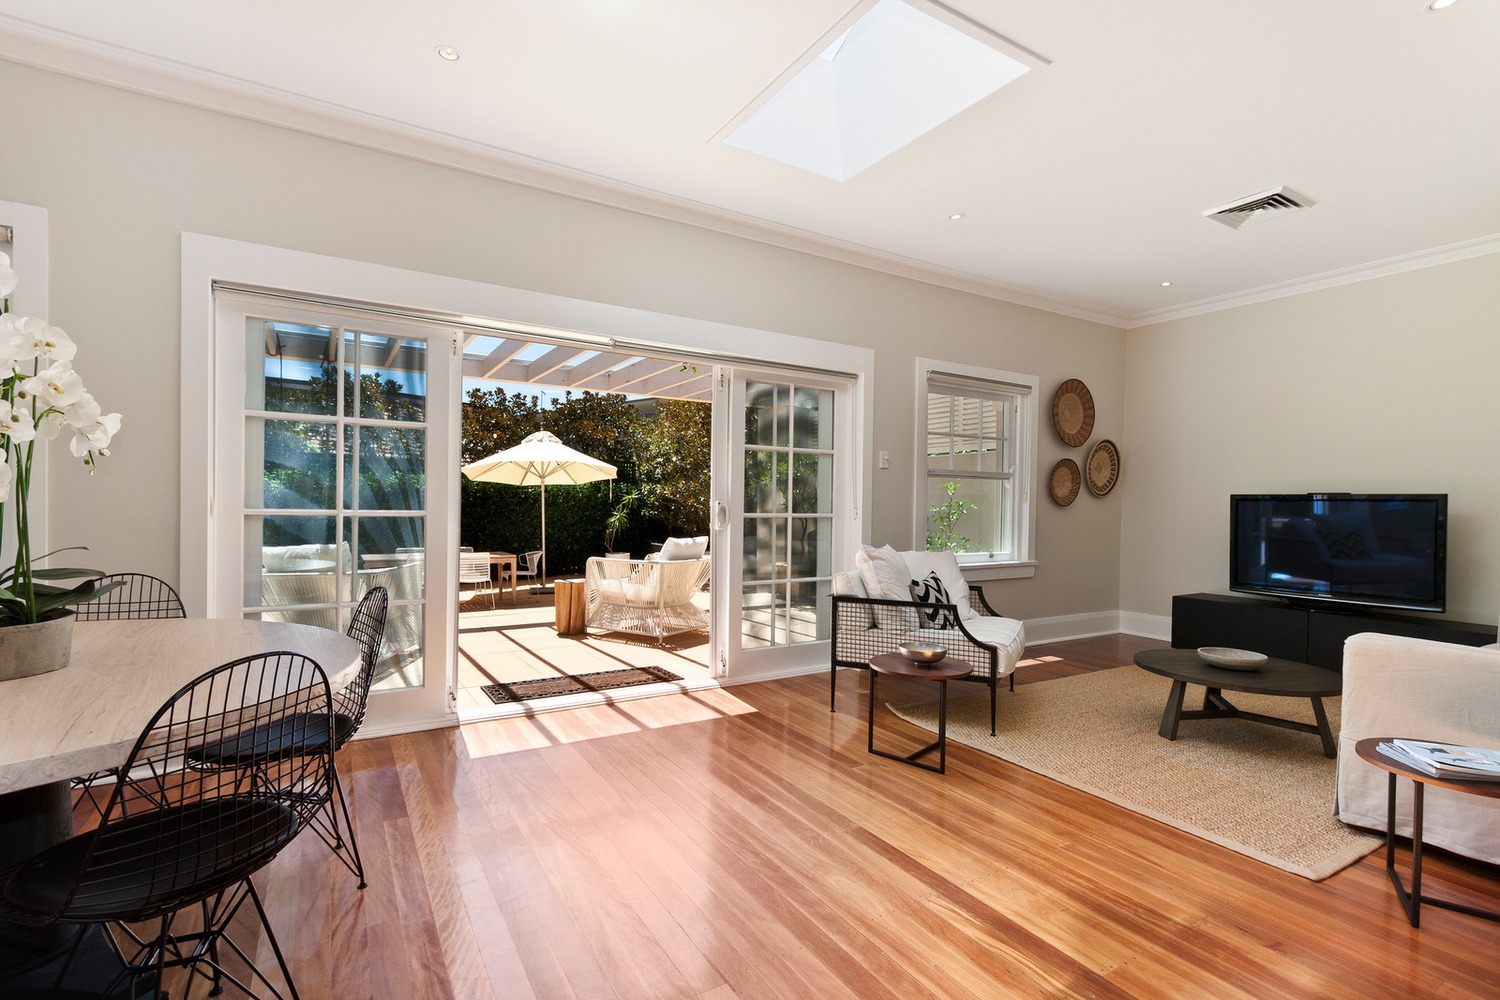 The open living area that connects to the garden is a testament to the successful home additions Niles project